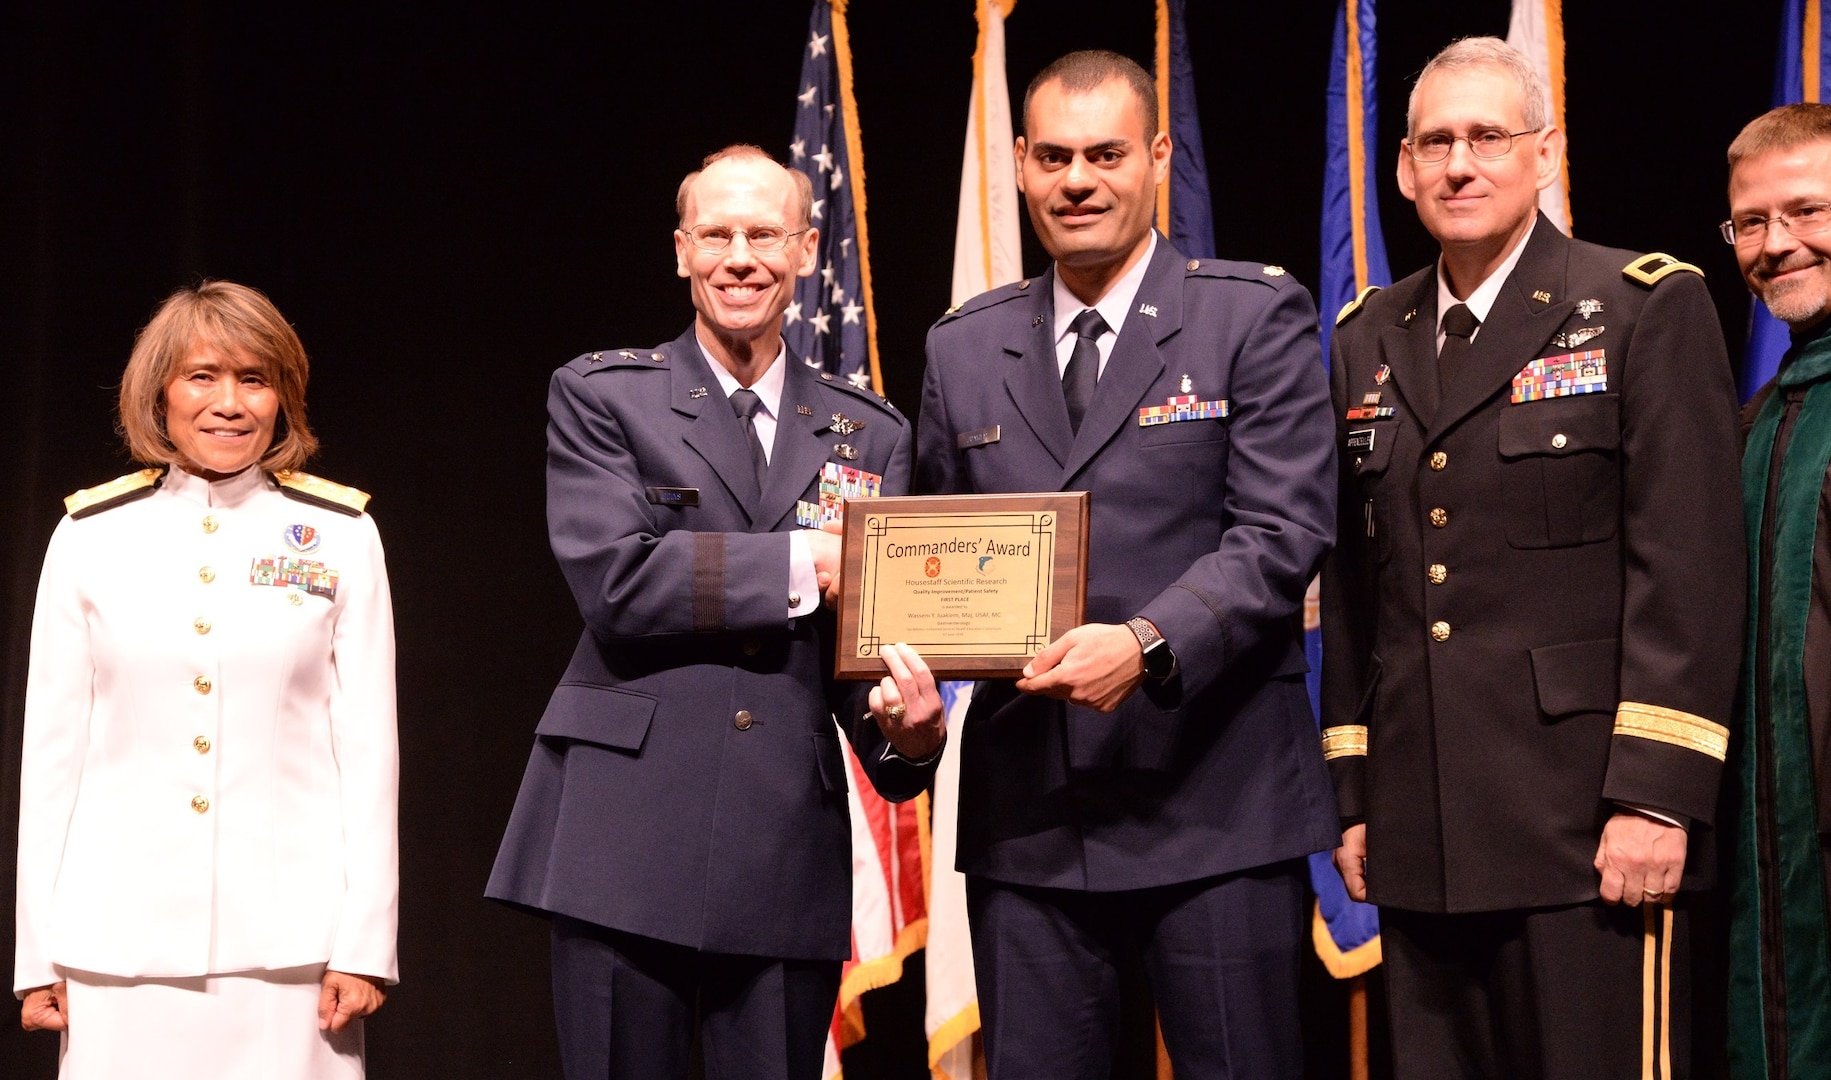 Air Force Maj. Wassem Juakiem, gastroenterology fellow, receives the Commander’s Award for Quality Improvement and Patient Safety during the San Antonio Uniformed Services Health Education Consortium graduation ceremony held June 7 at the Lila Cockrell Theatre in downtown San Antonio. Also pictured are (from left) Vice Adm. Raquel Bono, director of the Defense Health Agency; Air Force Maj. Gen. Bart O. Iddins, 59th Medical Wing commander; Army Brig. Gen. George Appenzeller, Brooke Army Medical Center commander; and Dr. Woodson Scott Jones, dean of SAUSHEC.